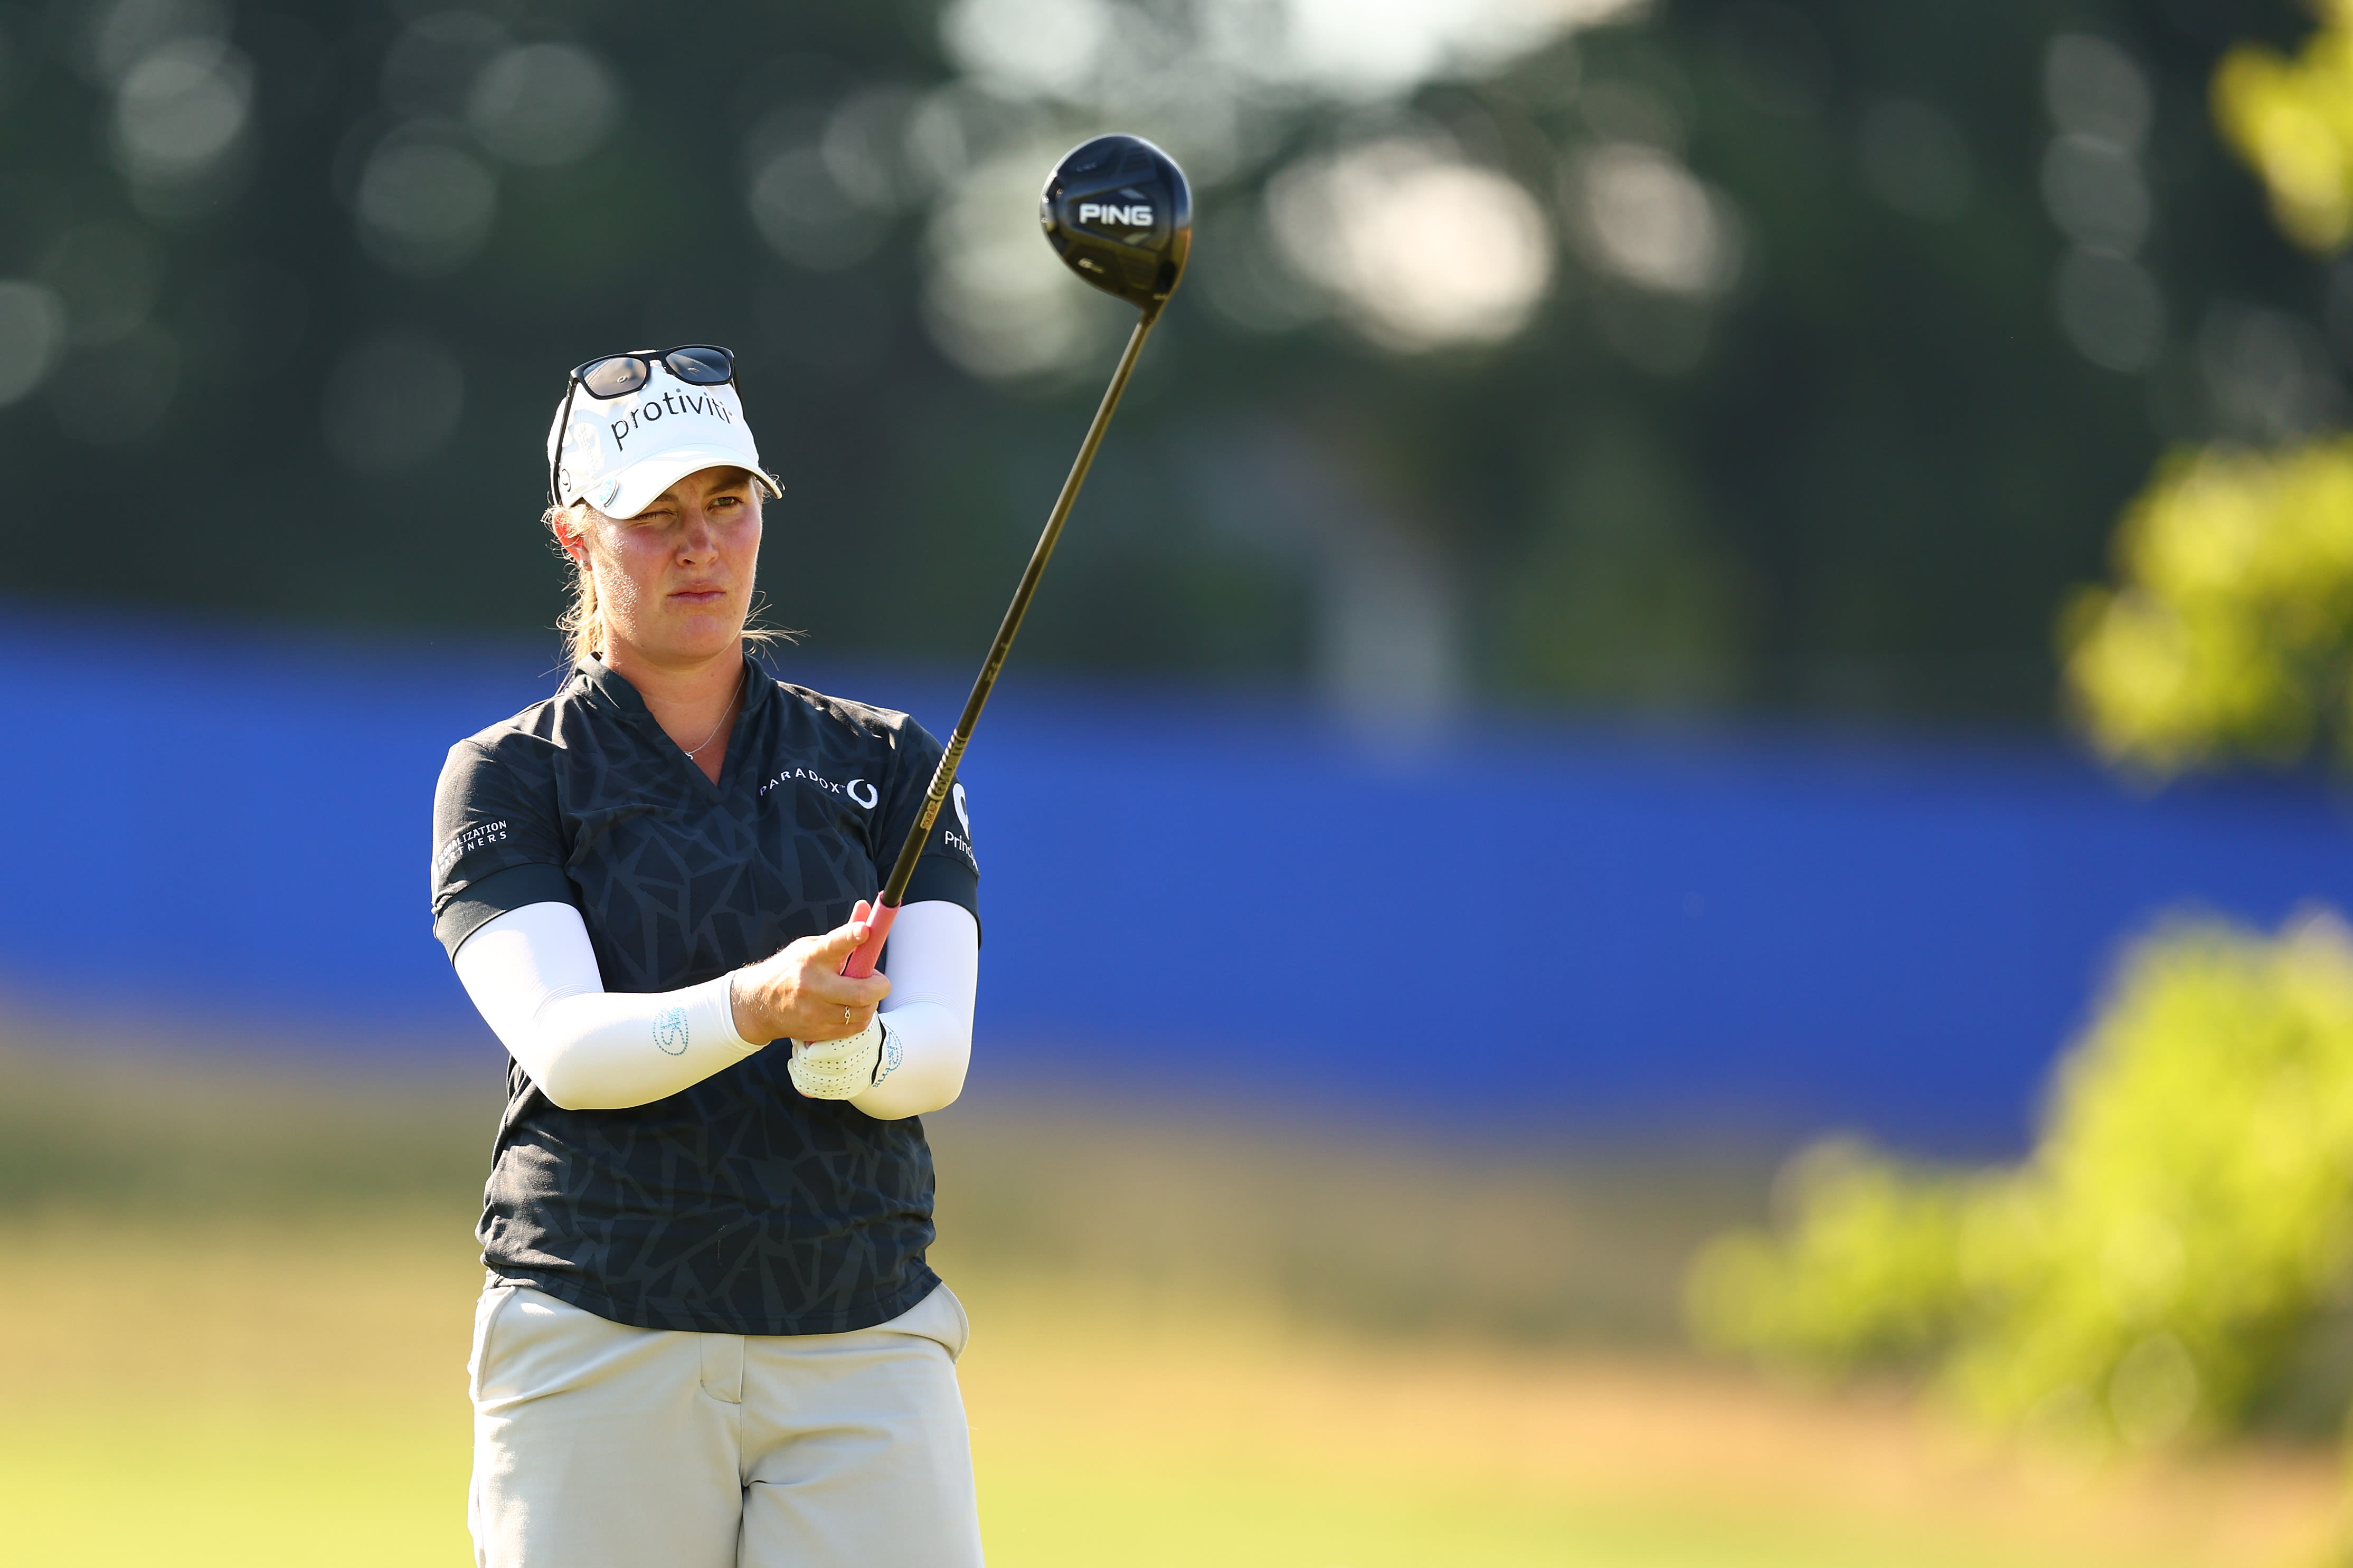 Jennifer Kupcho of the United States prepares to play her shot from the ninth tee during the second round of the KPMG Women's PGA Championship at Congressional Country Club on June 24, 2022 in Bethesda, Maryland. (Photo by Elsa/Getty Images)